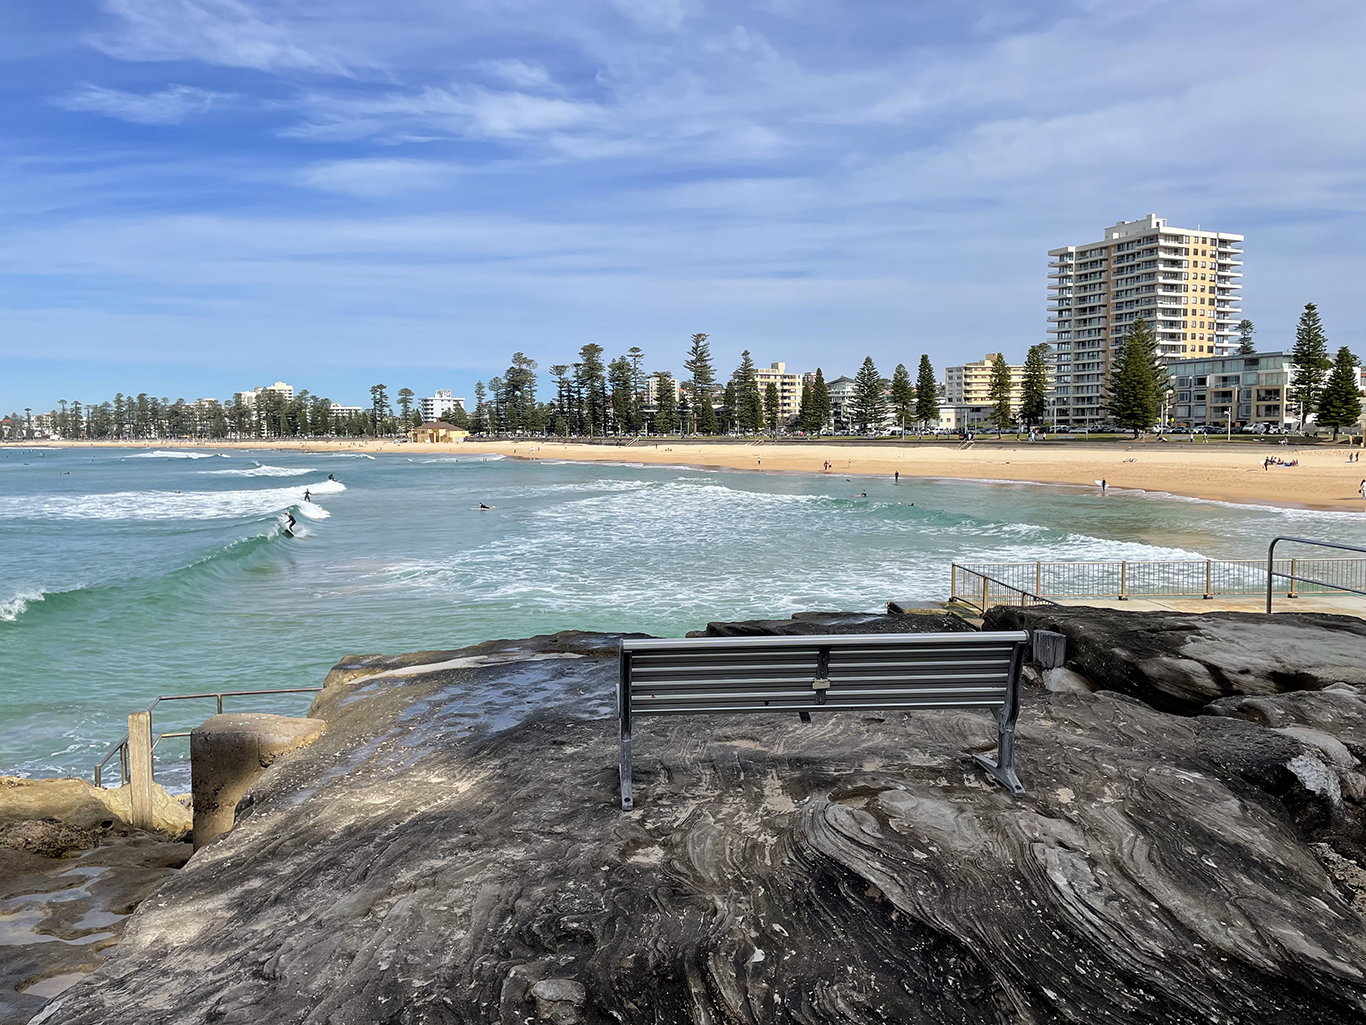 Freshwater, Queenscliff and Manly